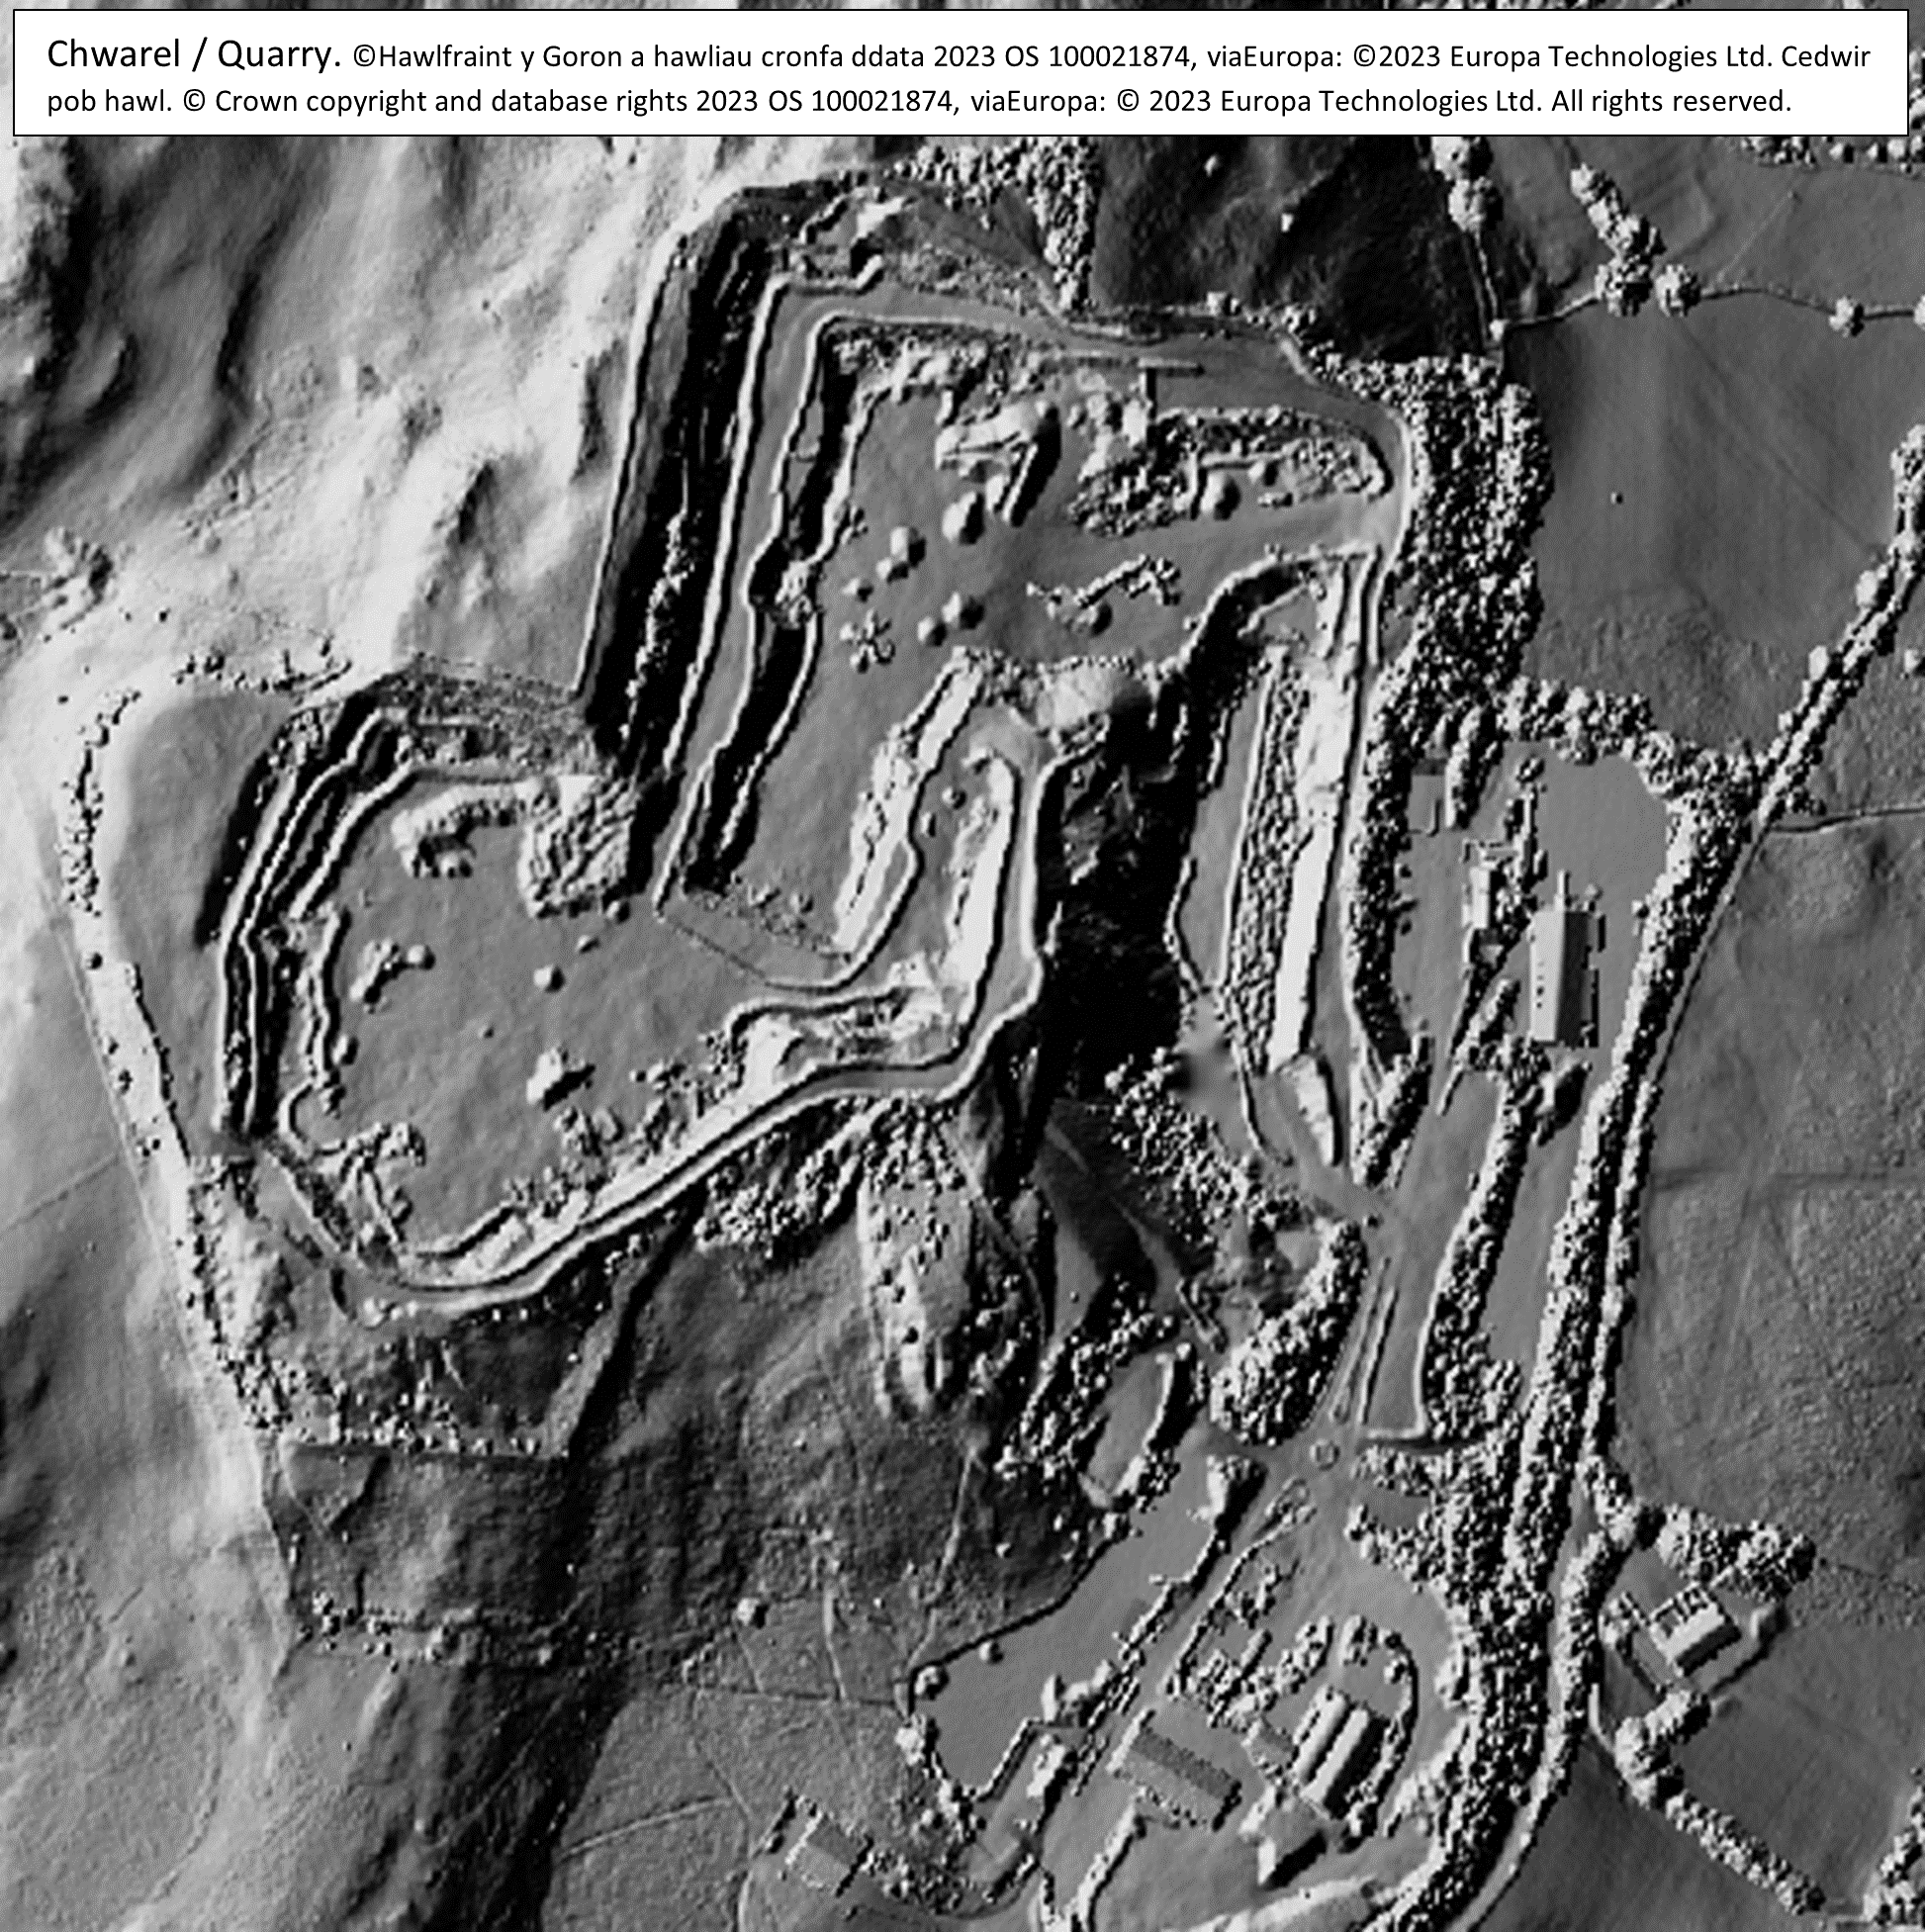 LiDAR image of a quarry in Wales